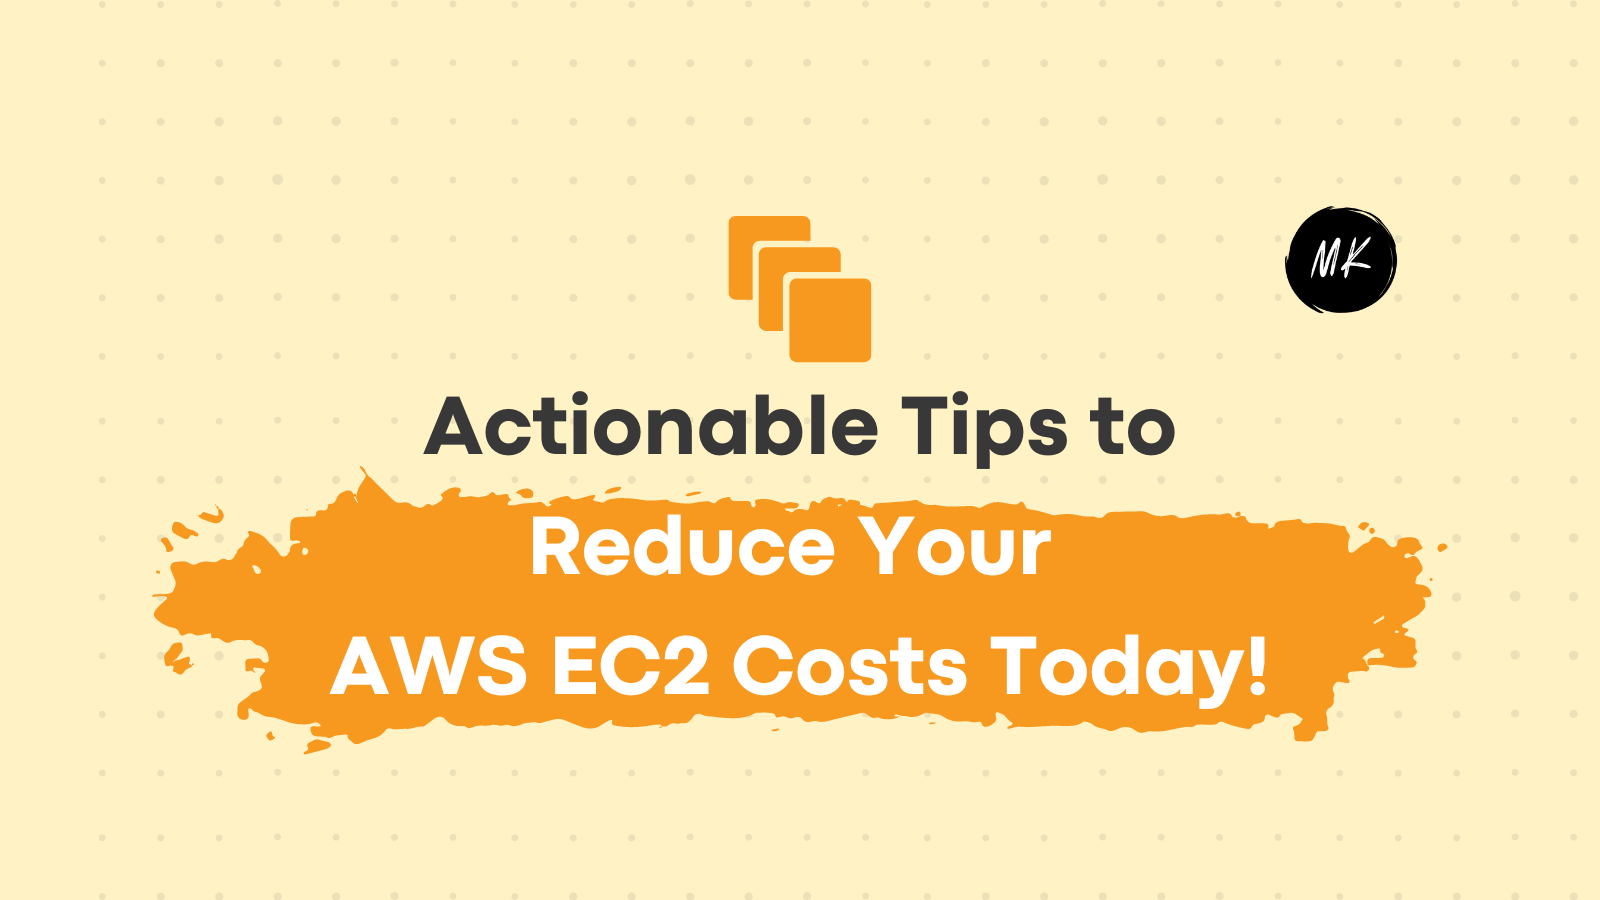 7 Actionable Tips to Reduce Your Amazon S3 Costs Today!